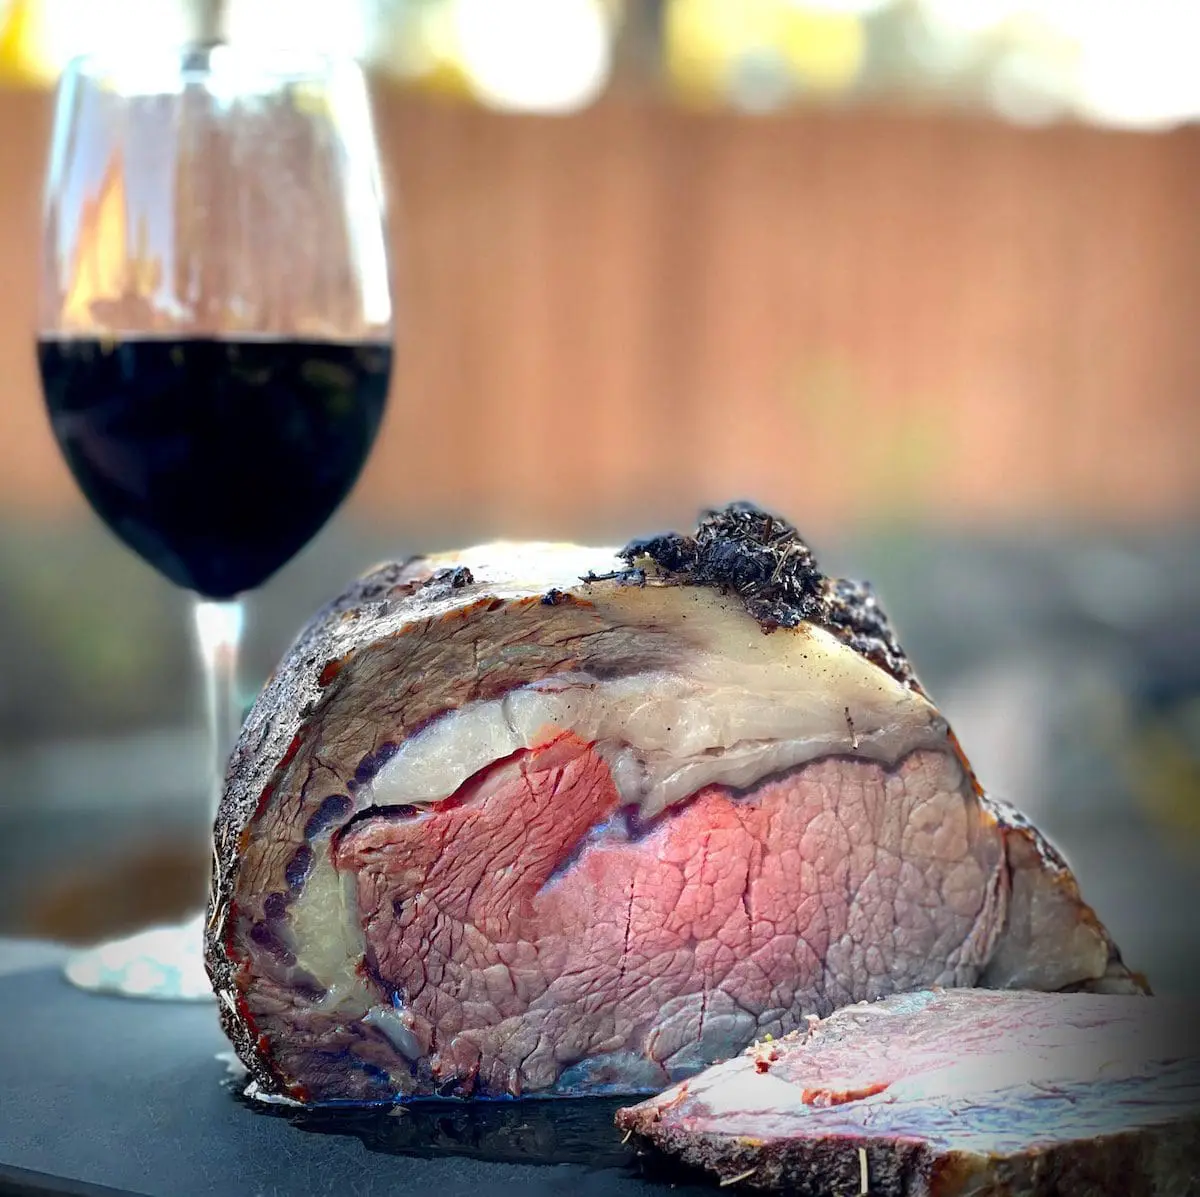 A smoked prime rib roast with one slice cut off laying on a black cutting board. A glass of red wine is setting next to the cutting board.